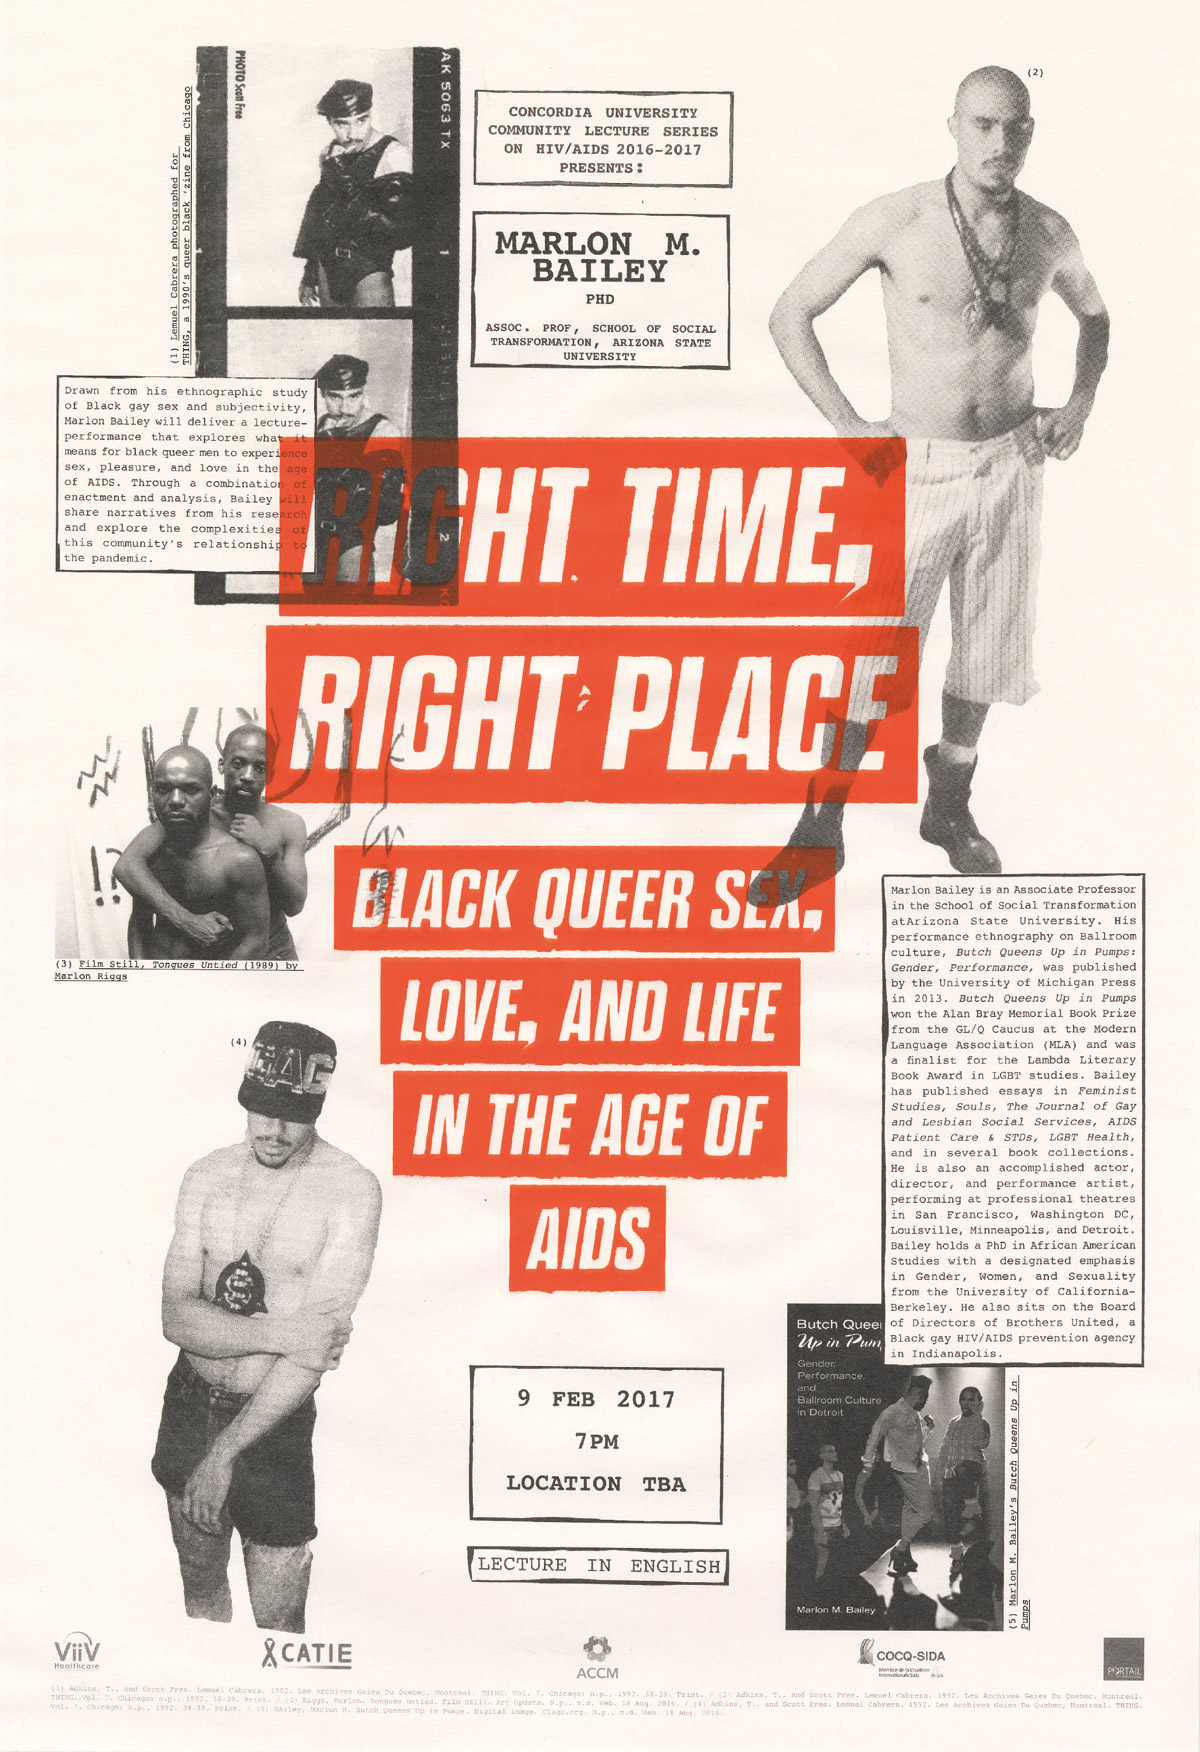 Lucas Larochelle for the Concordia Community HIV/AIDS Lecture Series (2016-2018), Right Time, Right Place, 2017. Digital Poster. Courtesy of the Concordia Community HIV/AIDS Lecture Series.